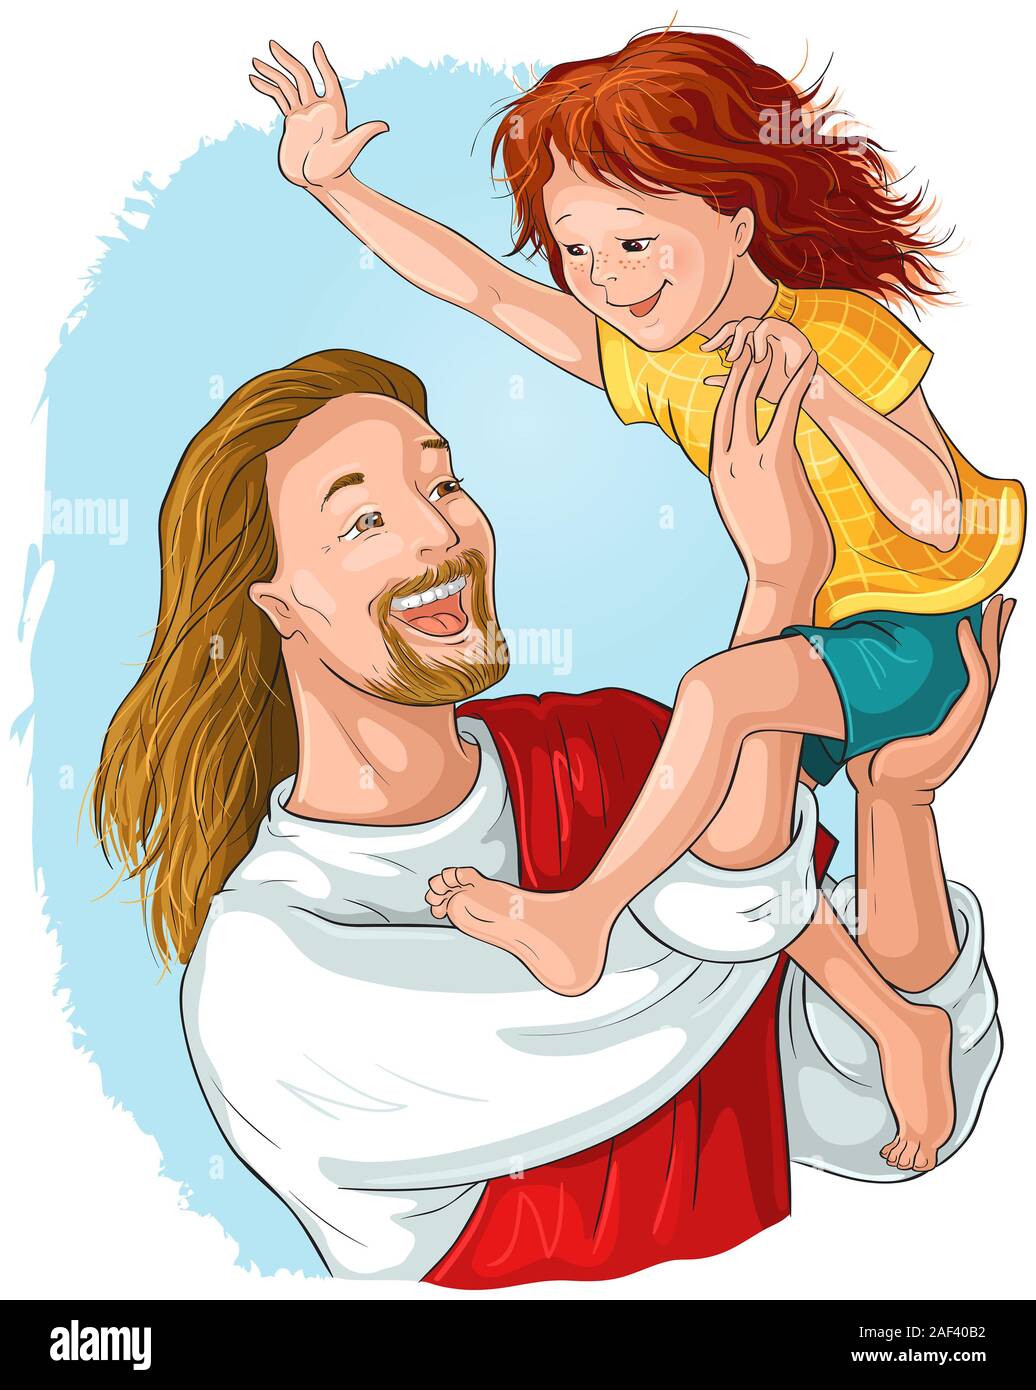 Laughing Jesus holds happy child in his arms cartoon christian illustration Stock Photo